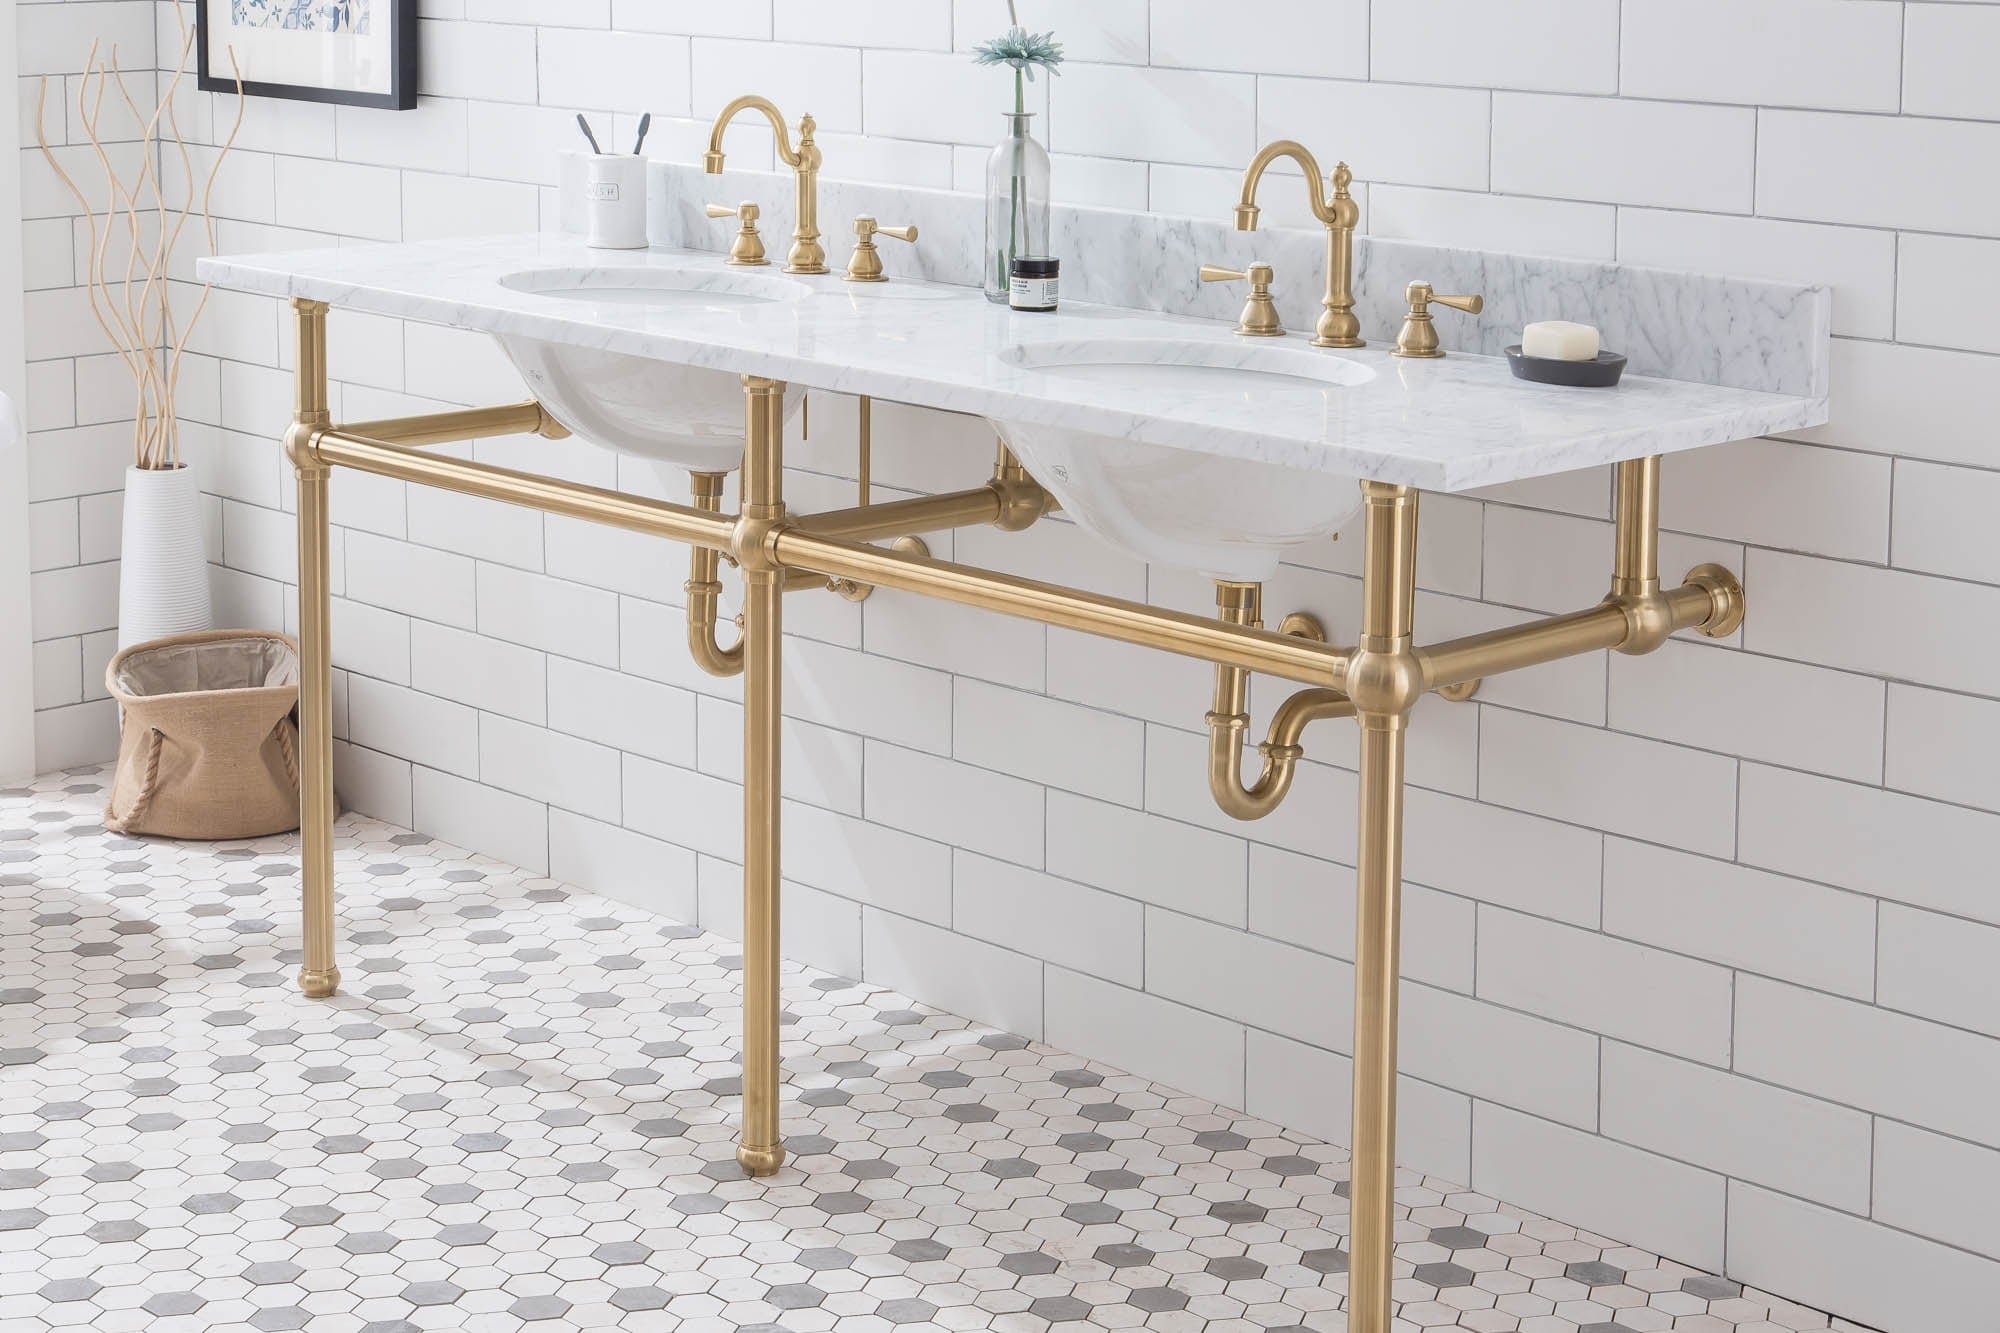 Embassy 72 Inch Wide Double Wash Stand, P-Trap, and Counter Top with Basin included in Satin Gold Finish - Molaix732030762329EB72C-0600